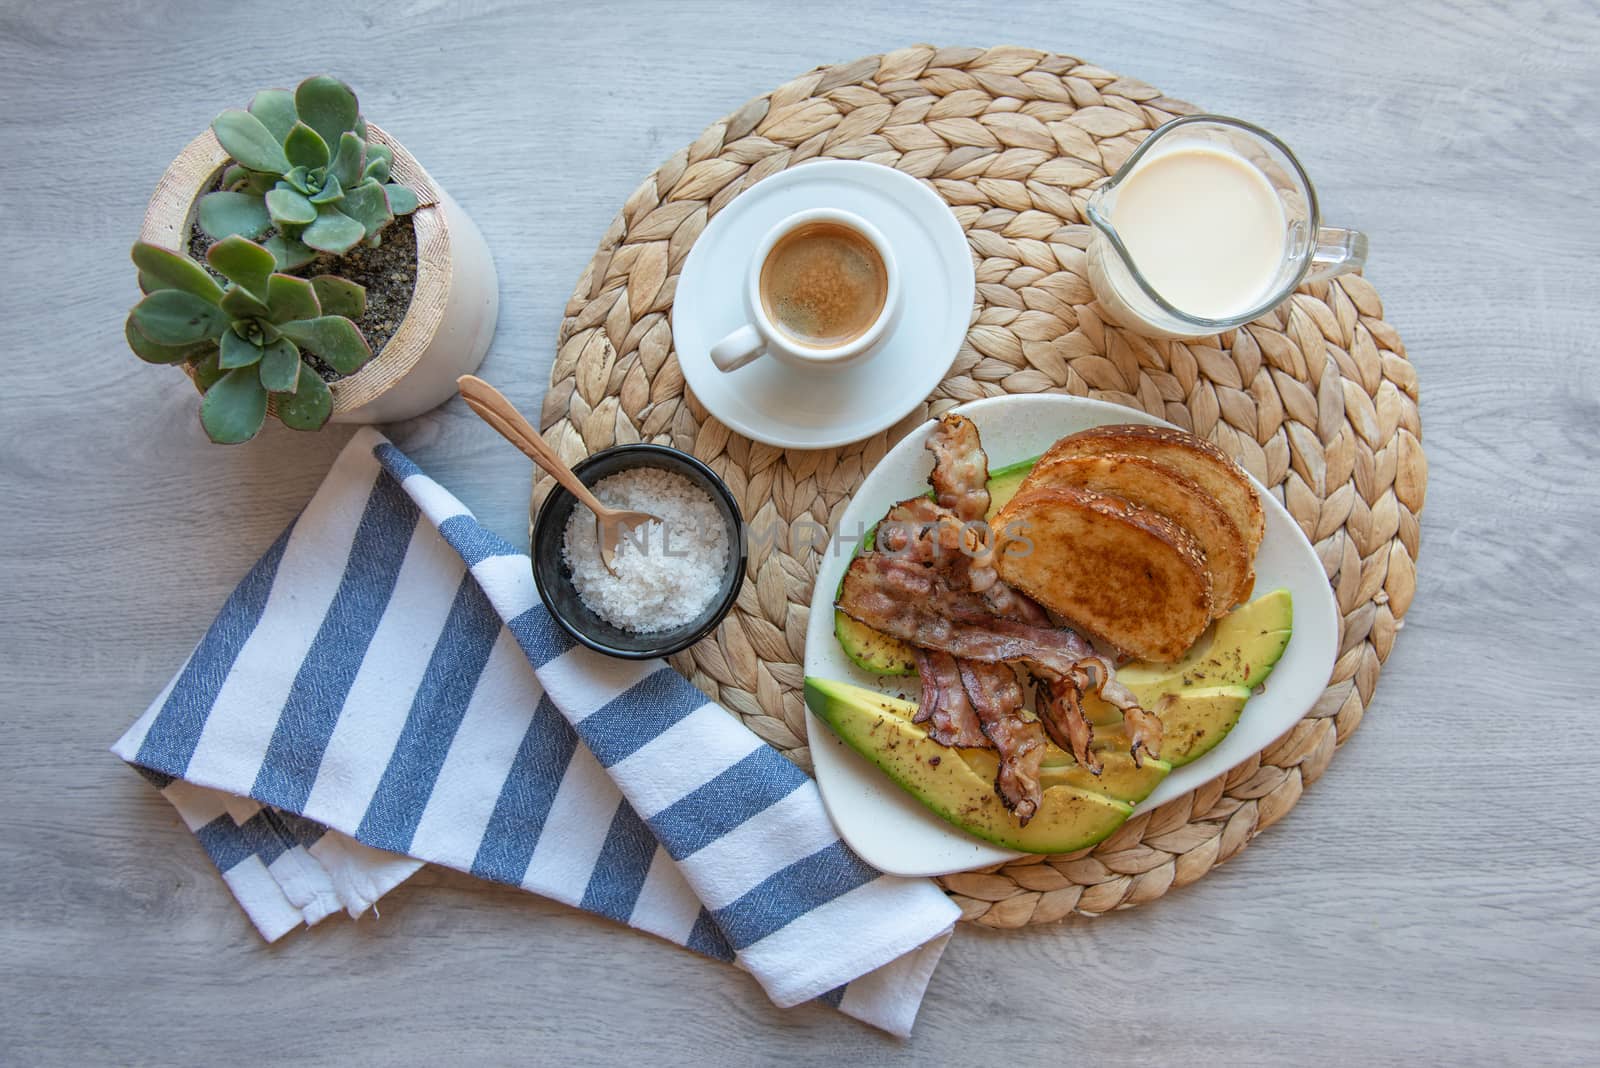 Fried bacon on white plate with cup of coffee and milk jug by marynkin